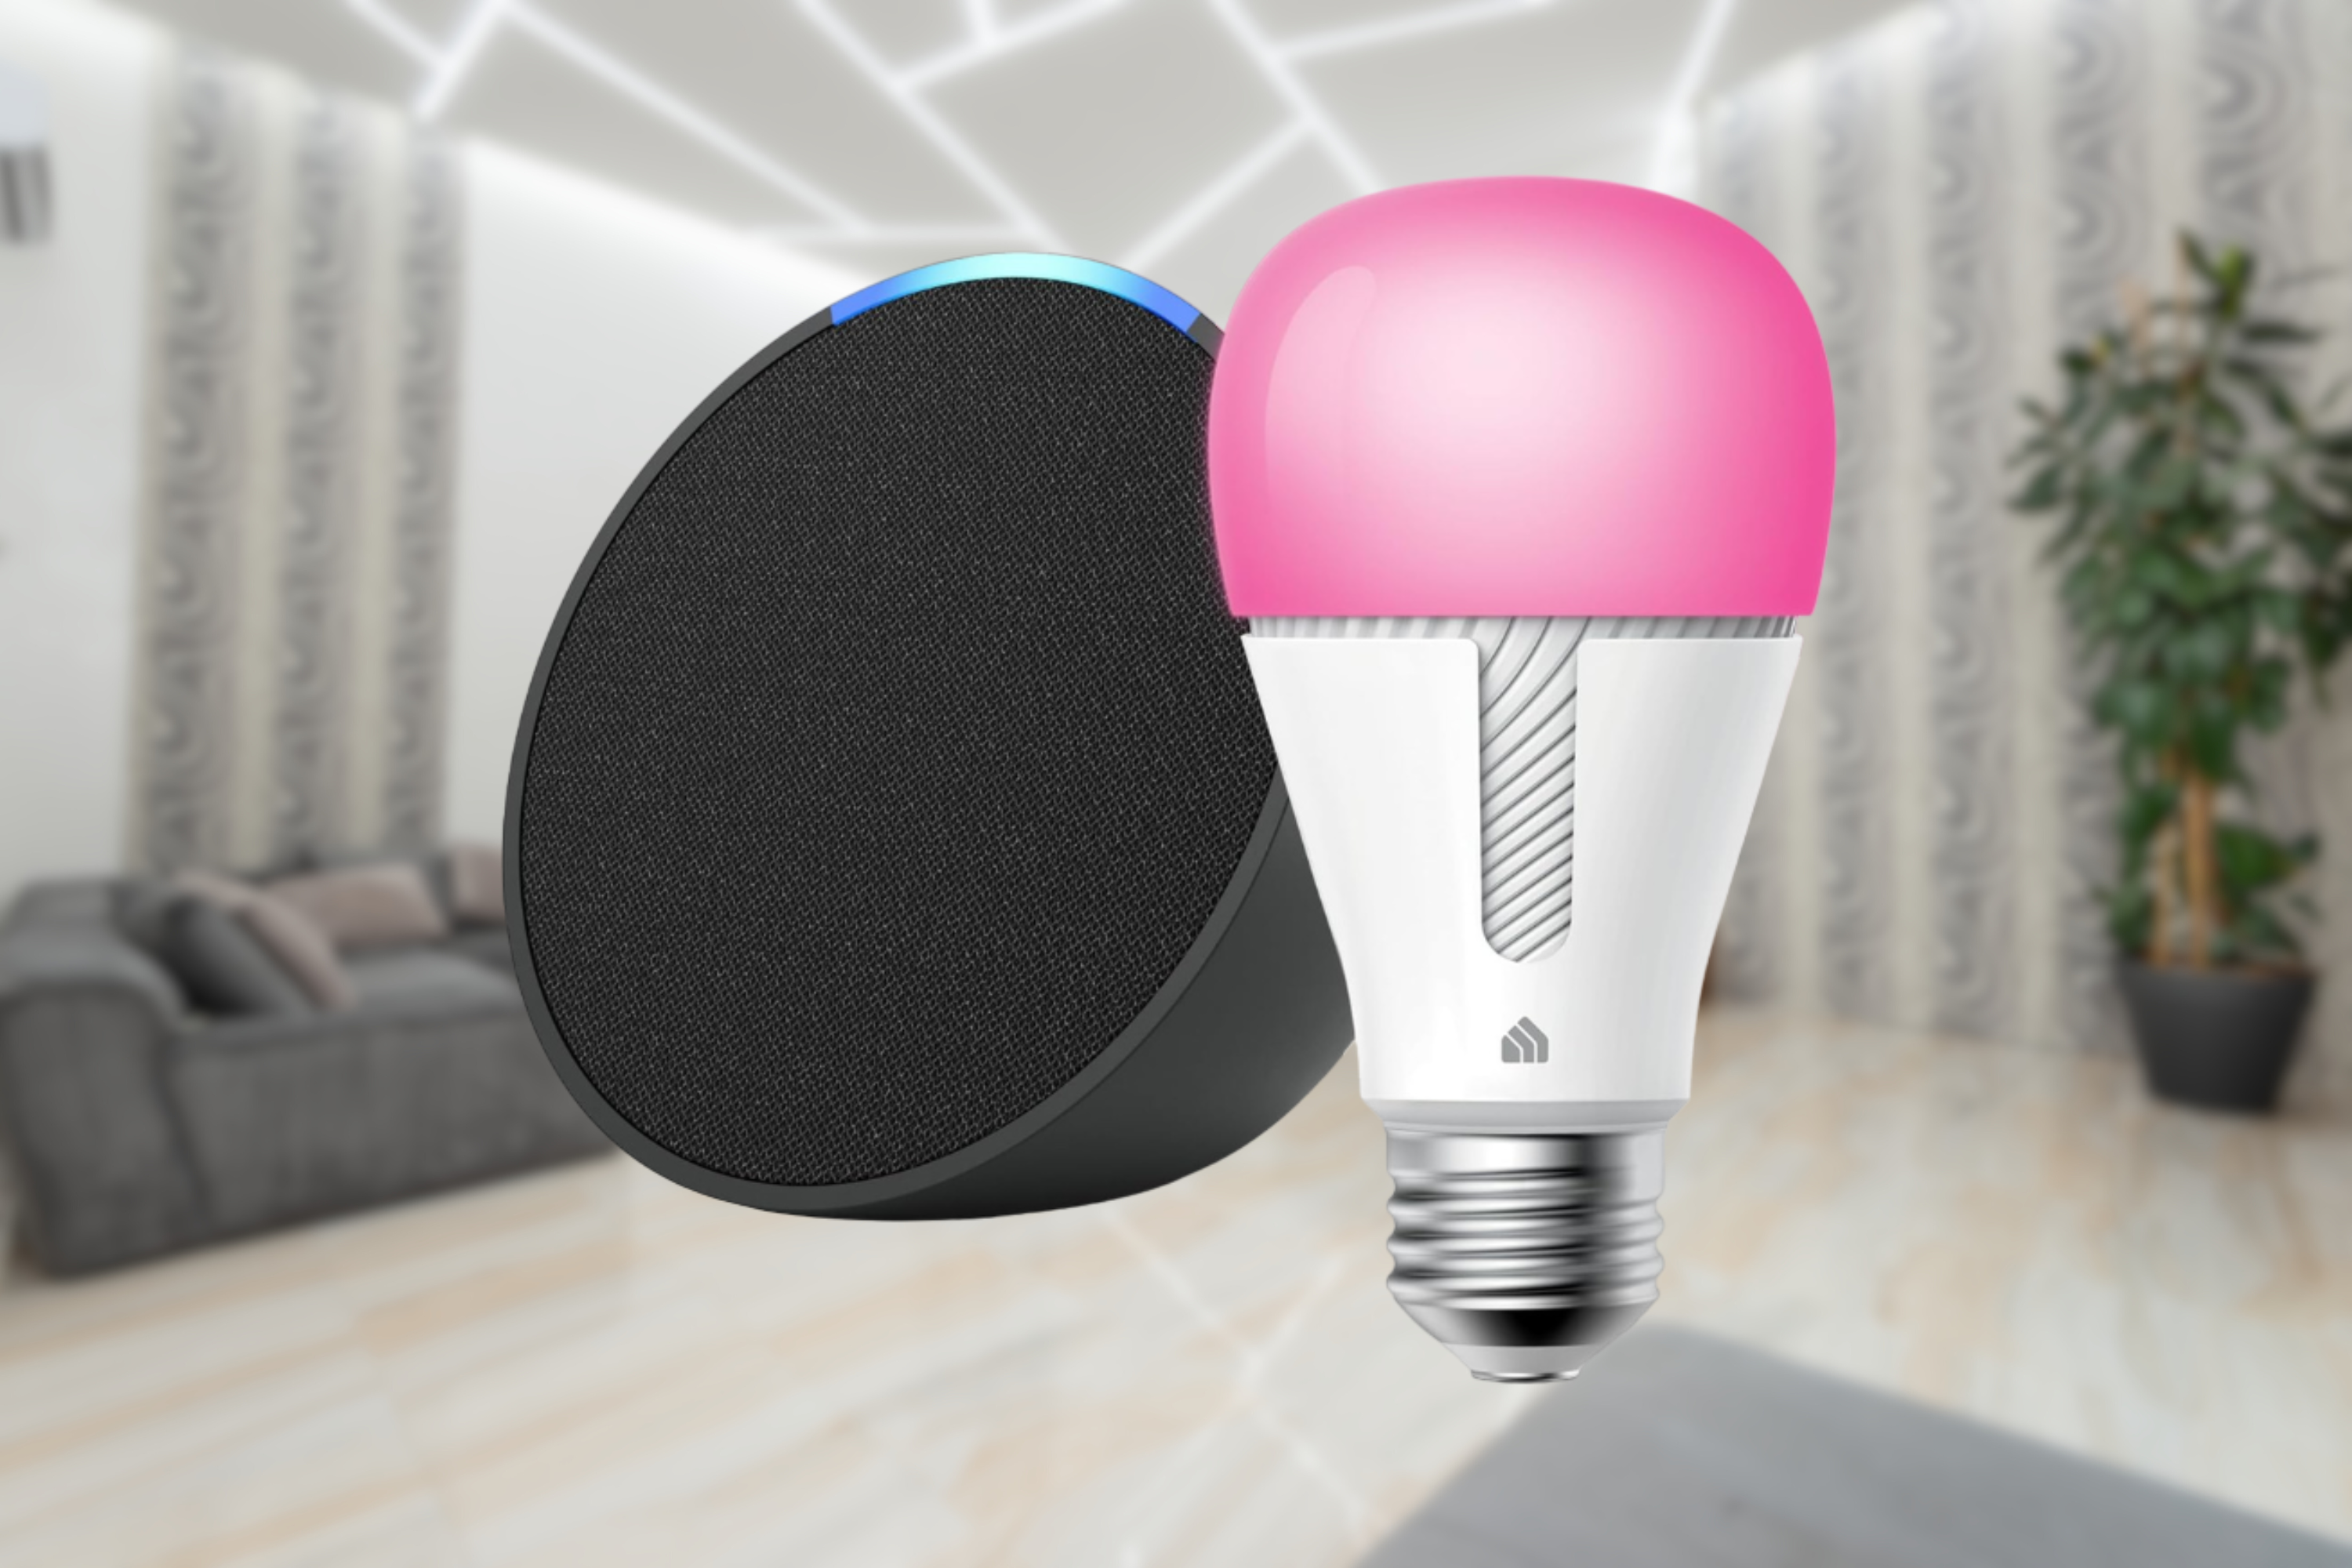 Echo Pop in Charcoal bundle with TP-Link Kasa Smart Color Bulb in front of blurred background of living room